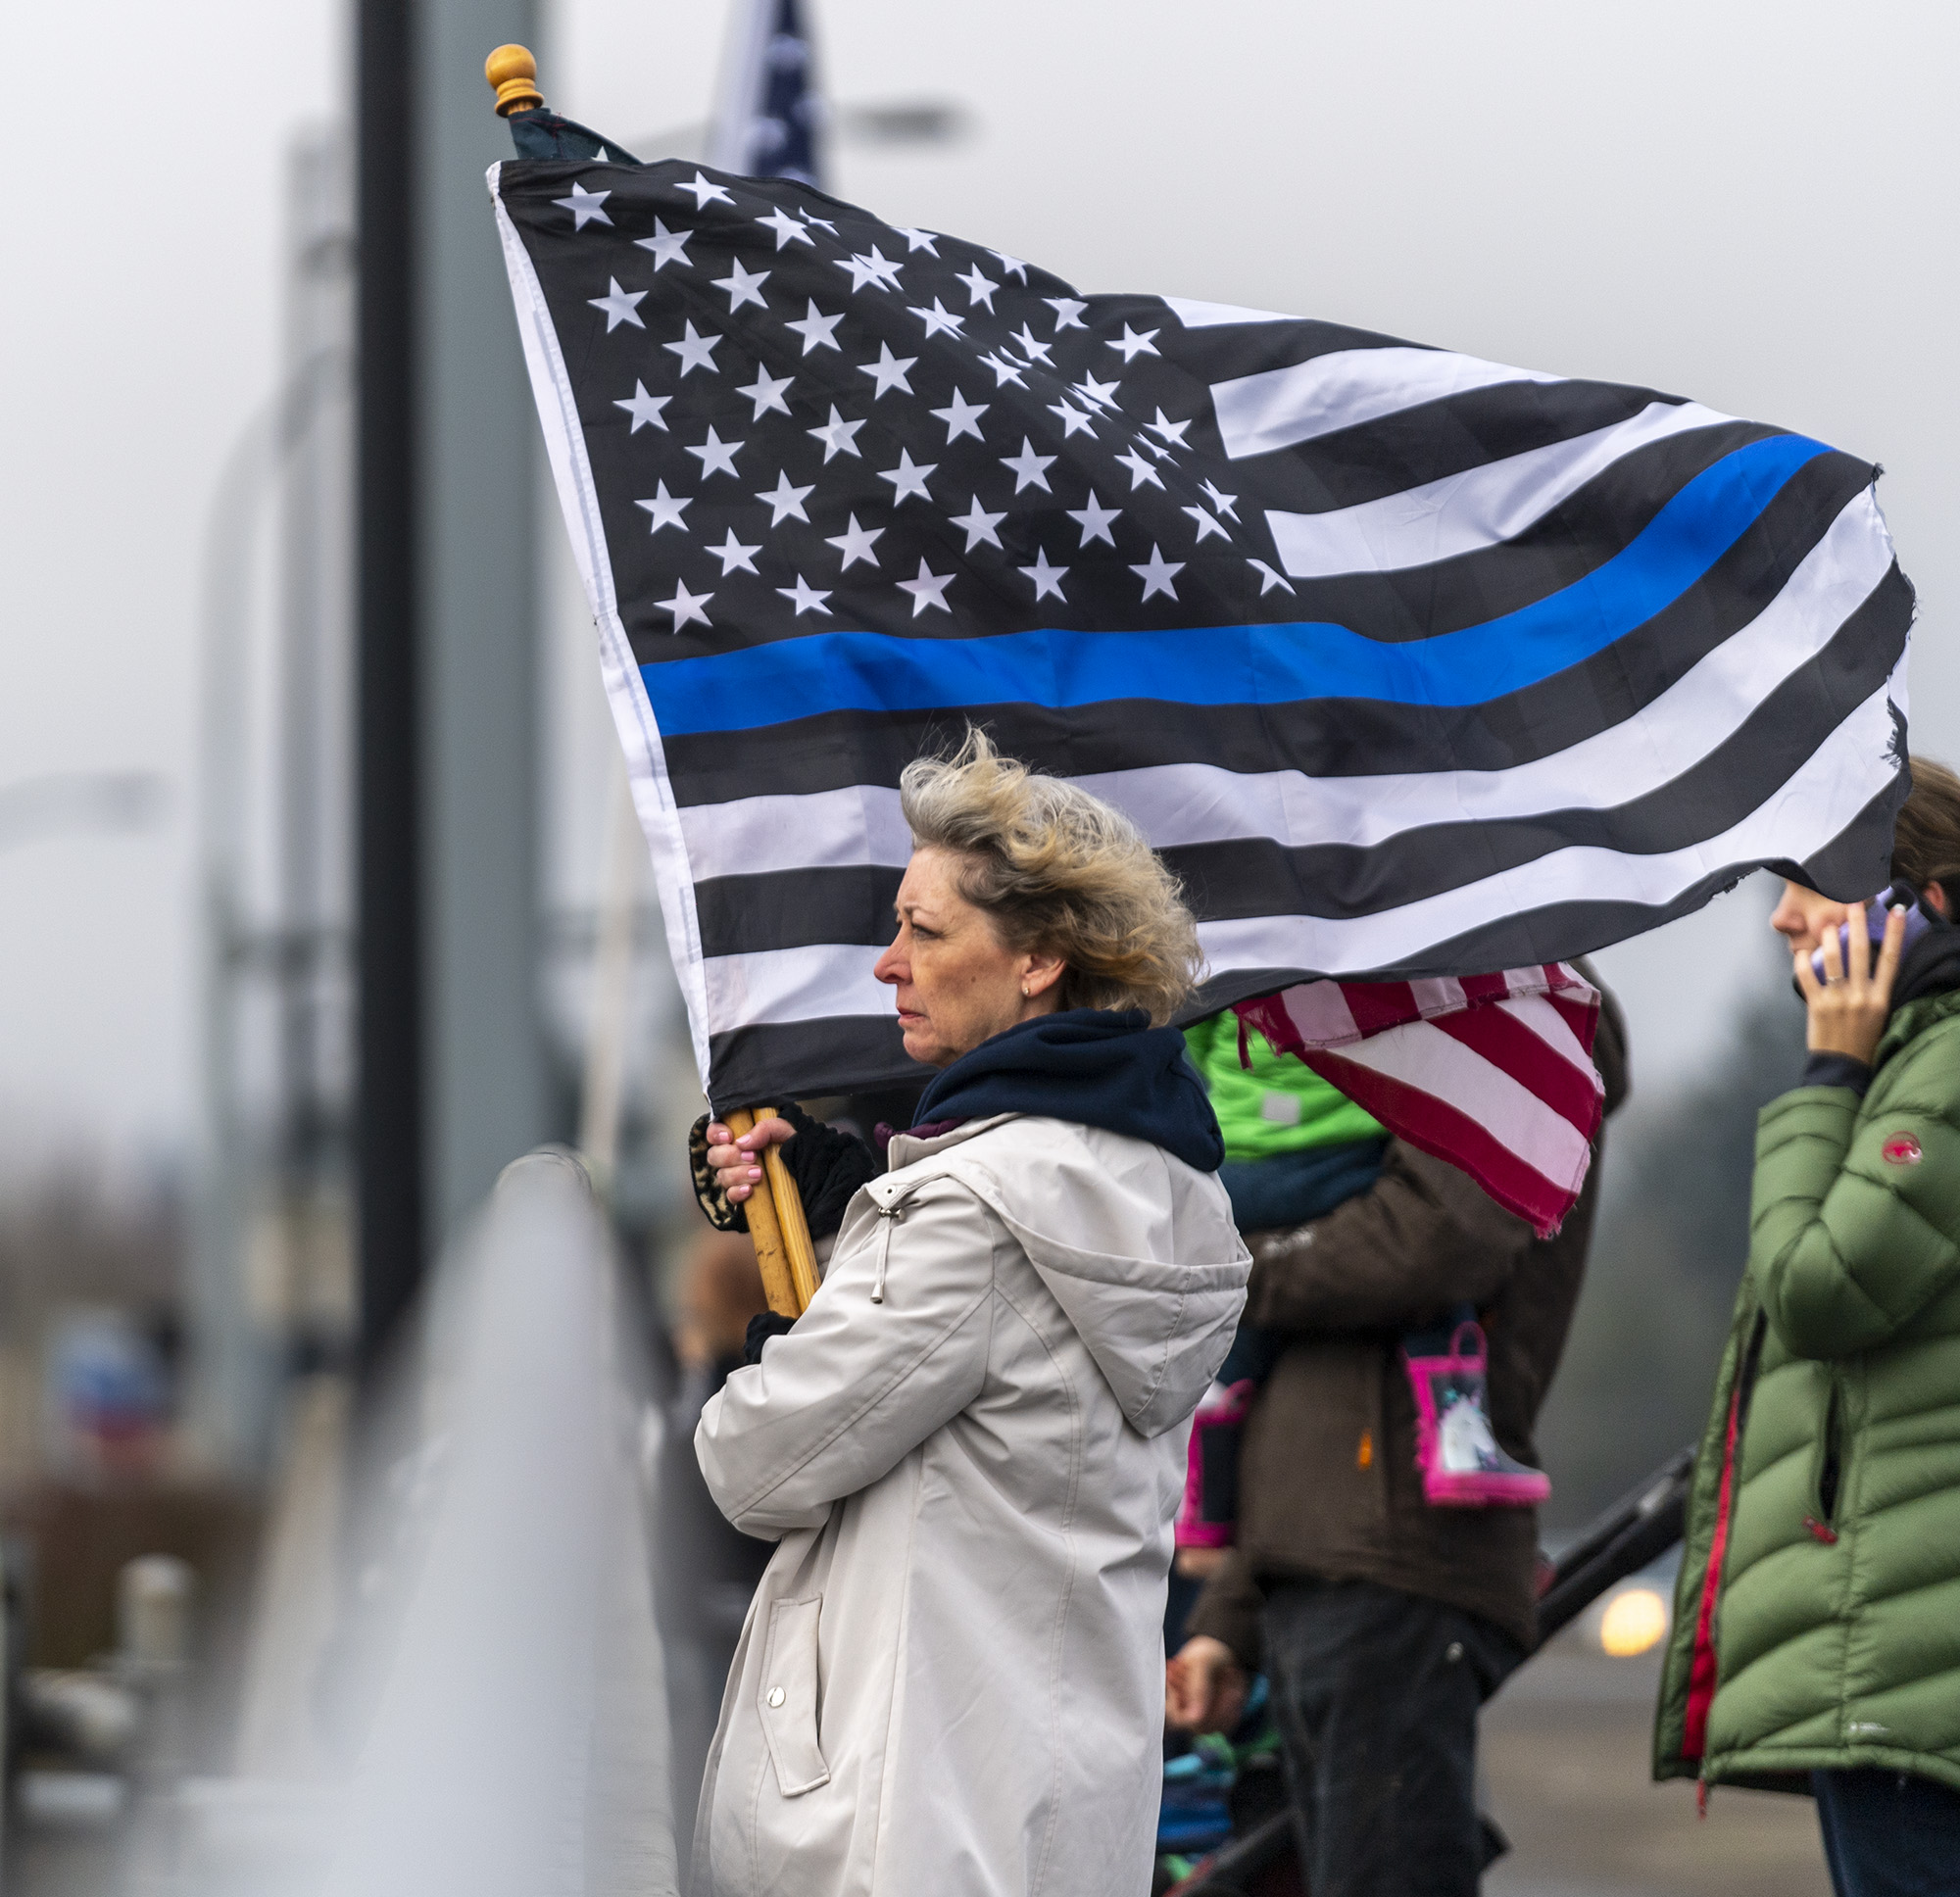 Tricia Davis of Battle Ground holds a thin blue line flag at the Pioneer Street I-5 overpass in Ridgefield on Tuesday, Feb. 8, 2022, before a funeral processional for Vancouver Police Department Officer Donald Sahota, who was fatally shot Jan. 29 during a manhunt for an armed robbery suspect.